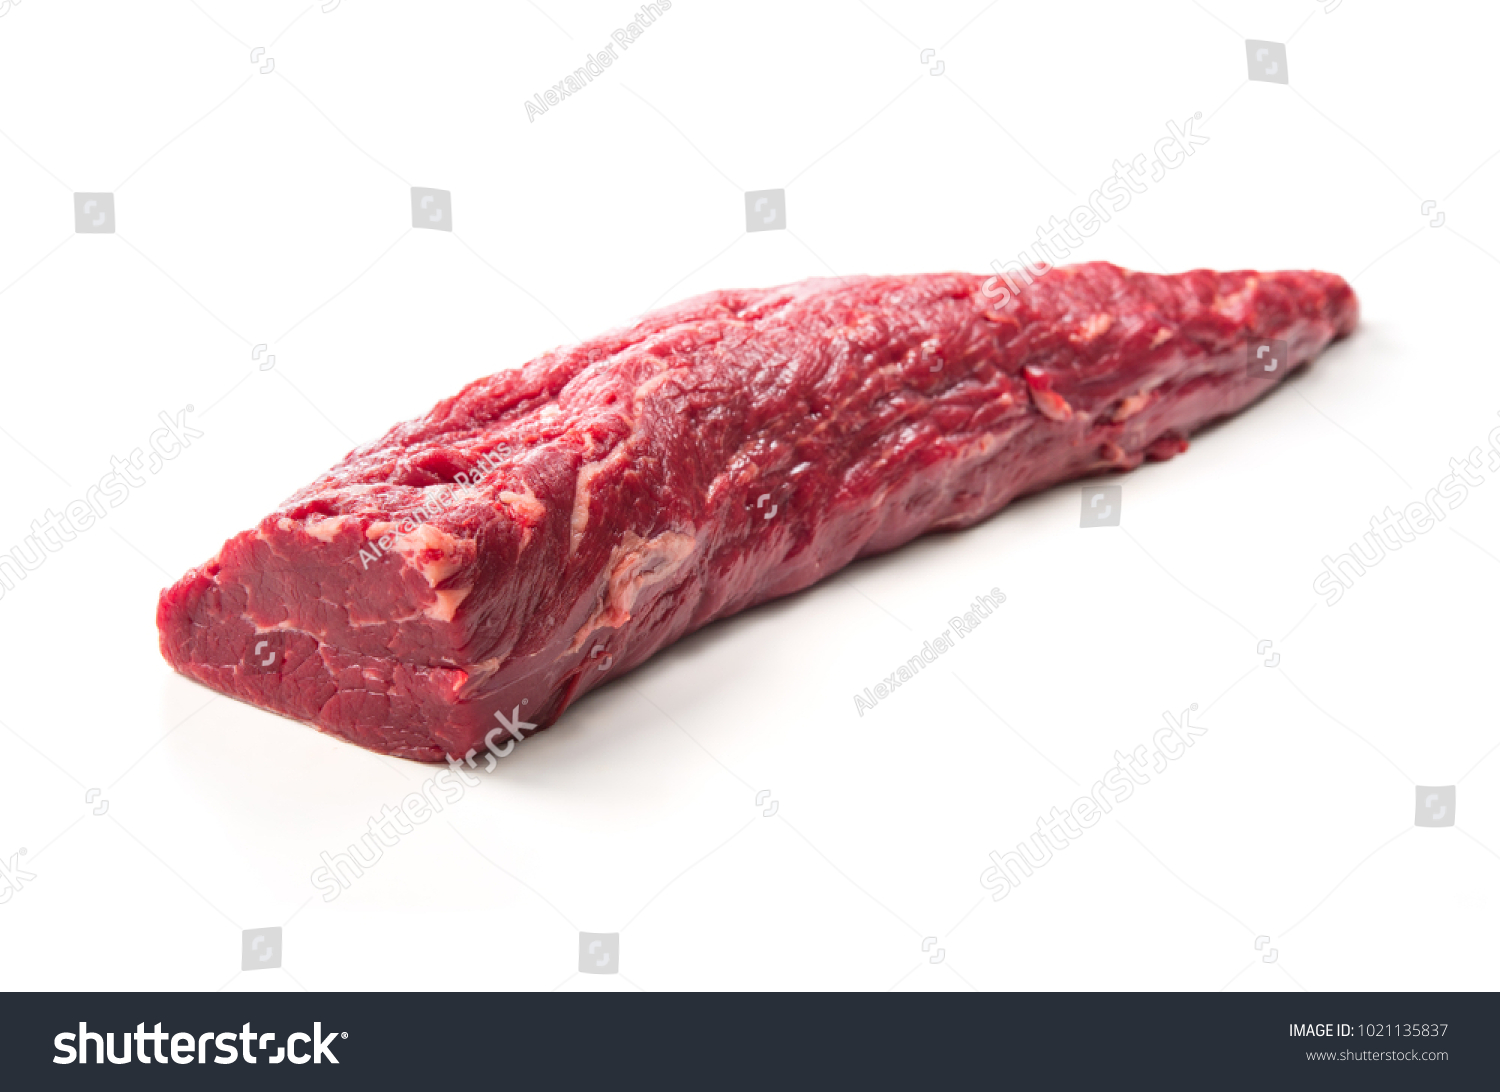 Fresh and raw beef meat. Whole piece of tenderloin ready to cook isolated on white background #1021135837